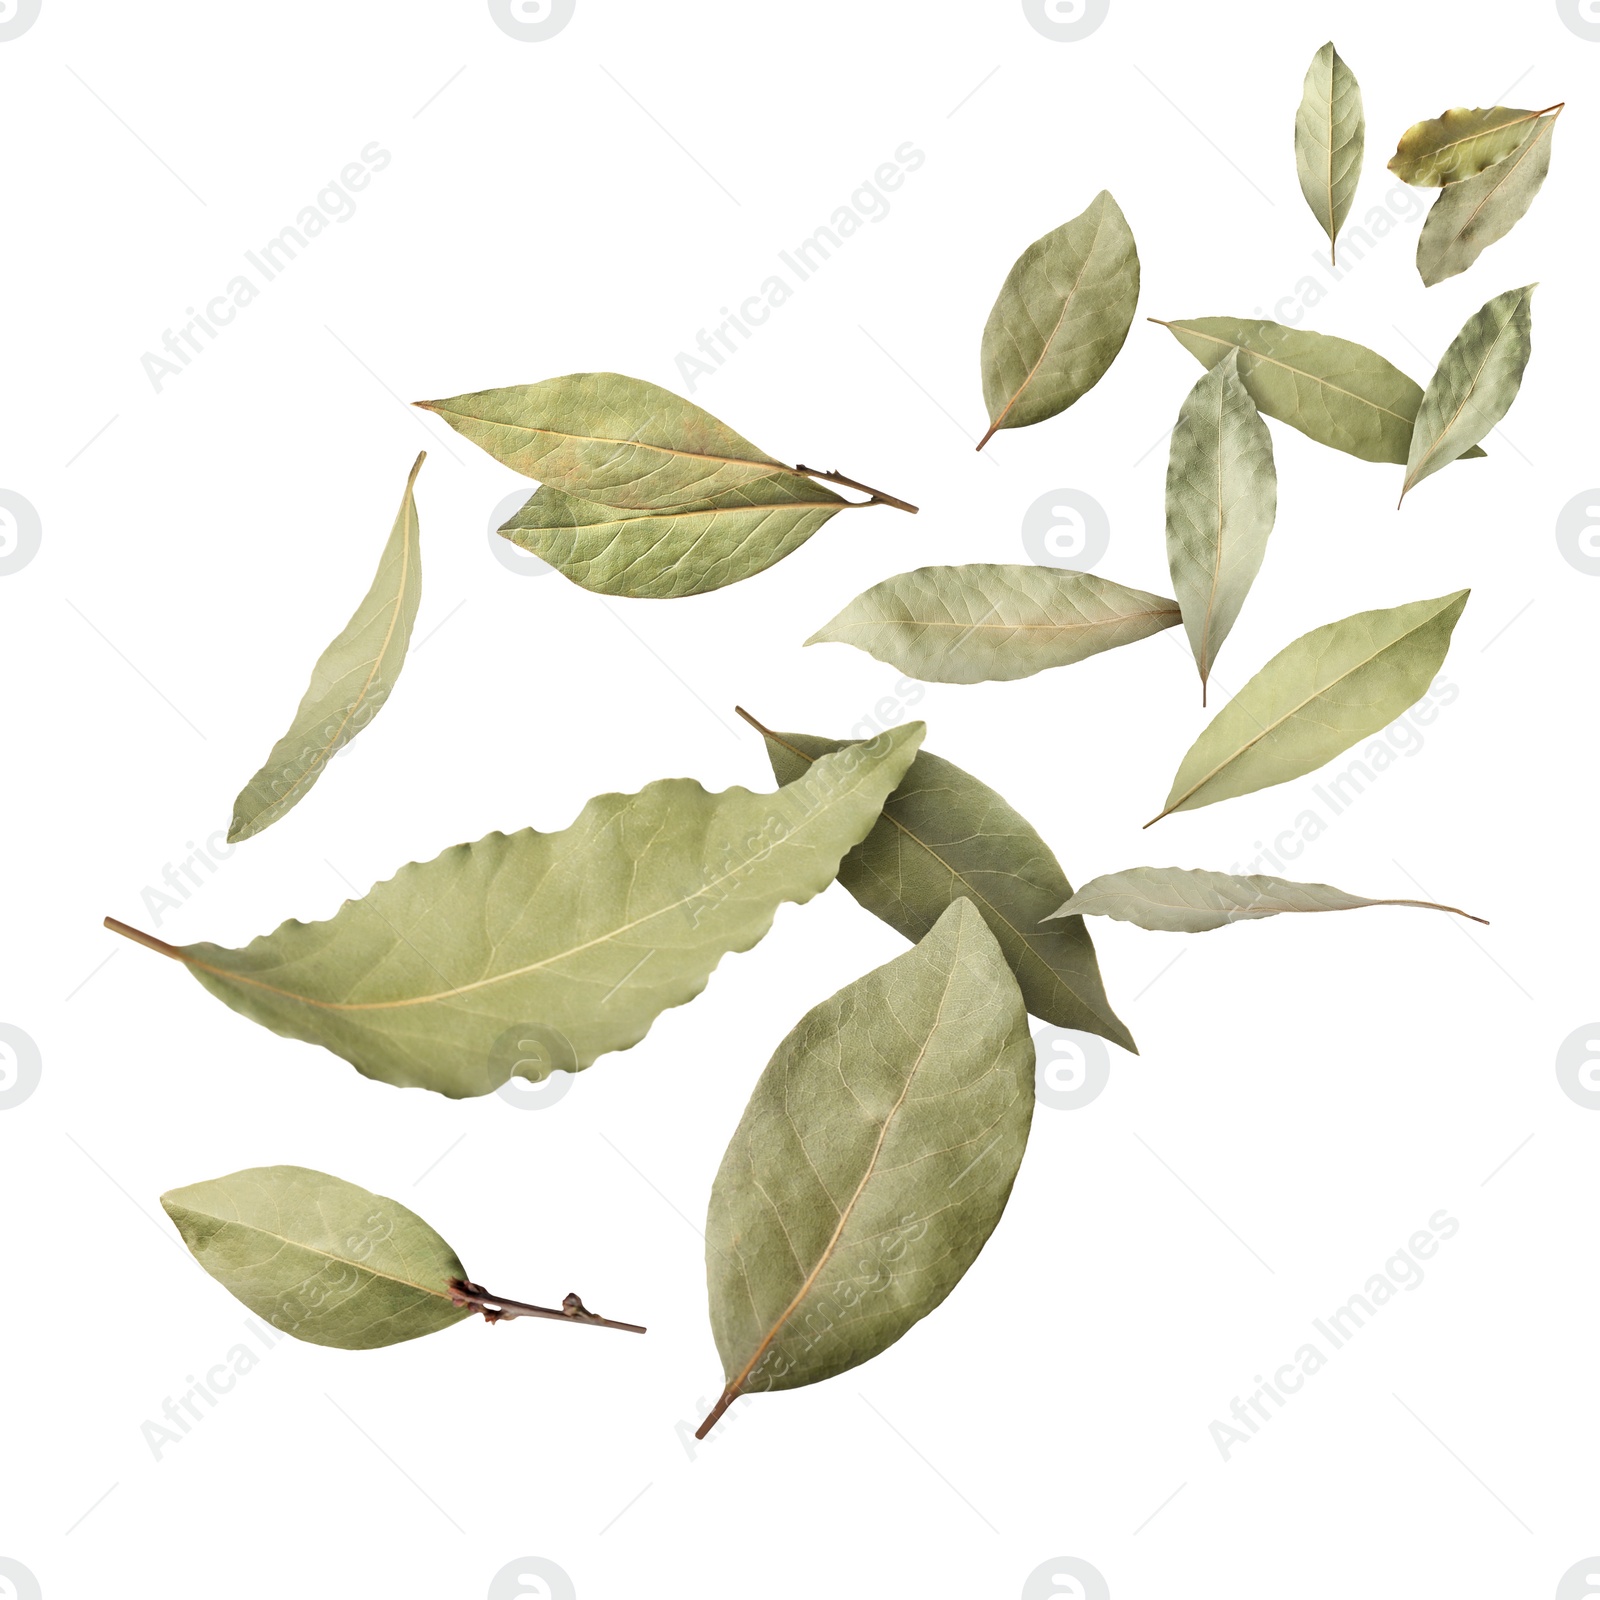 Image of Dry bay leaves falling on white background